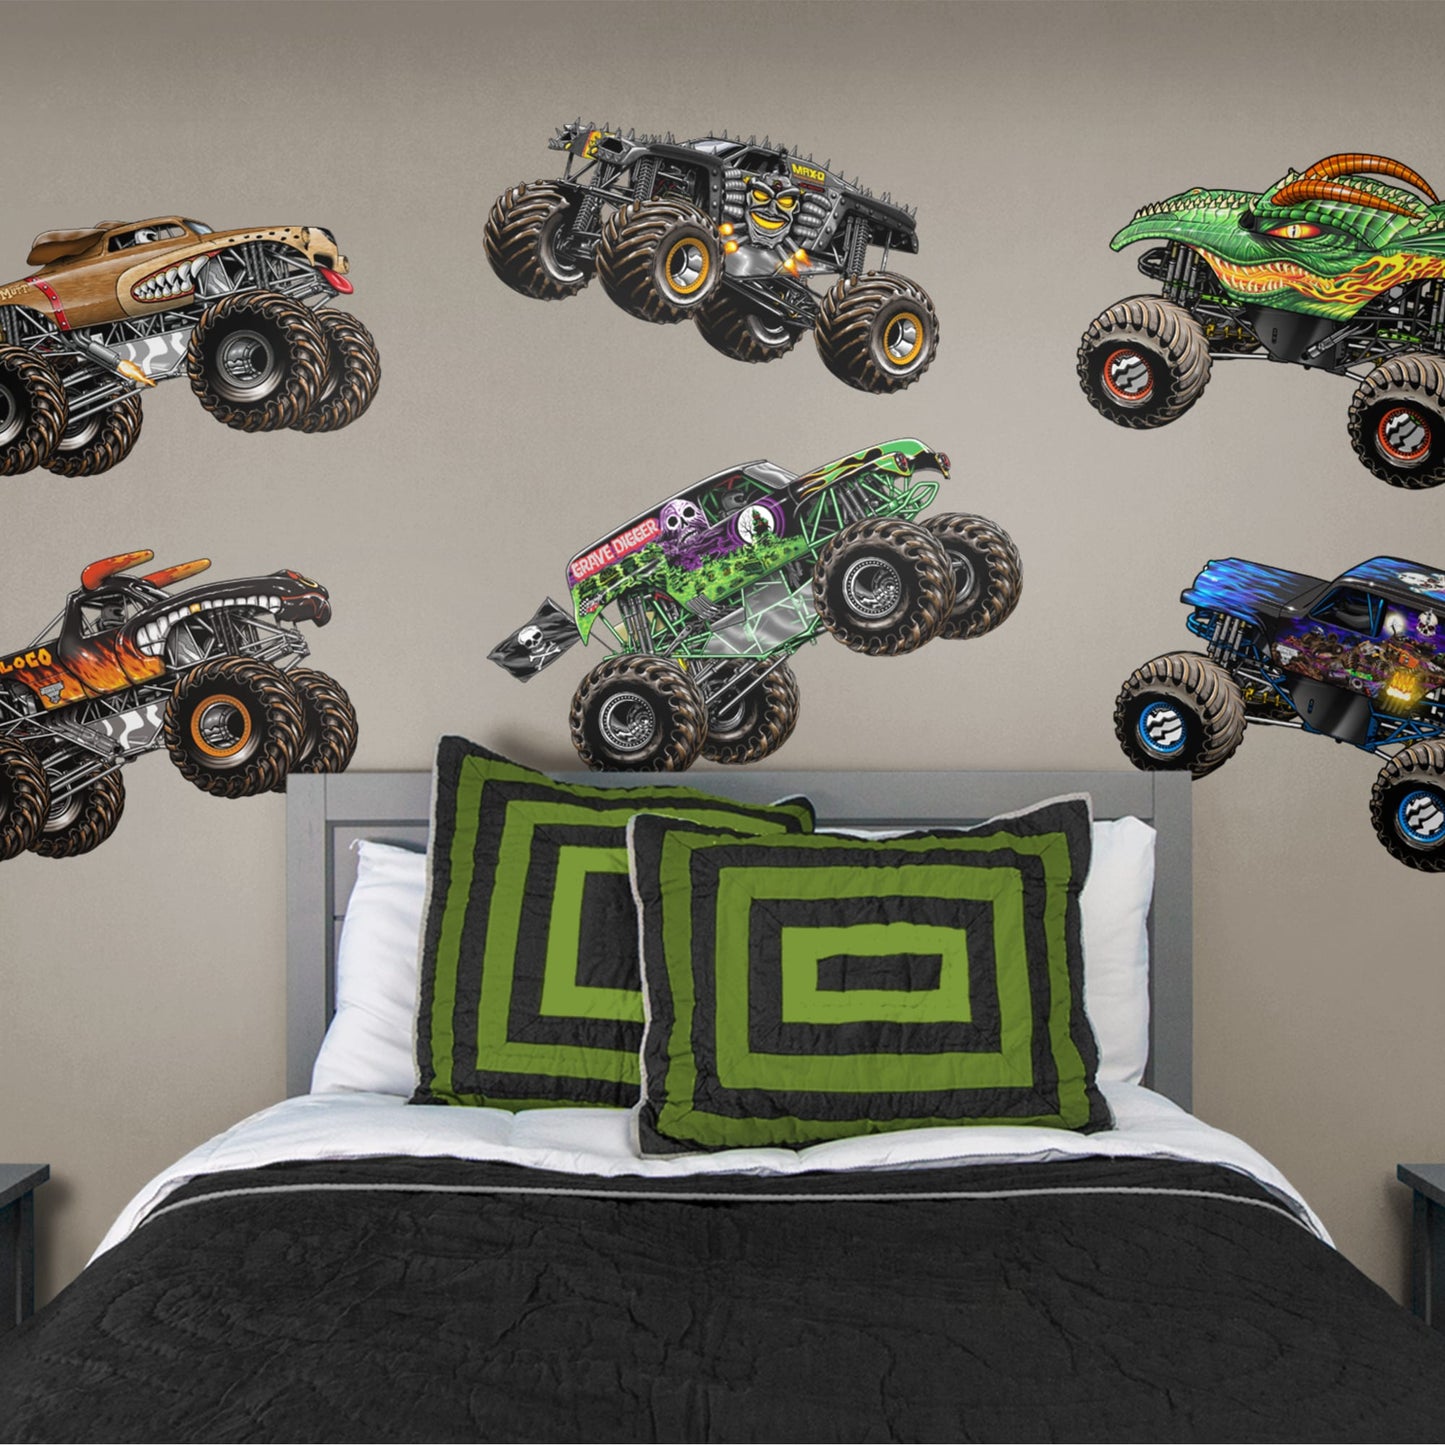 Monster Jam: Cartoon Trucks Collection  - Officially Licensed Removable Wall Decal